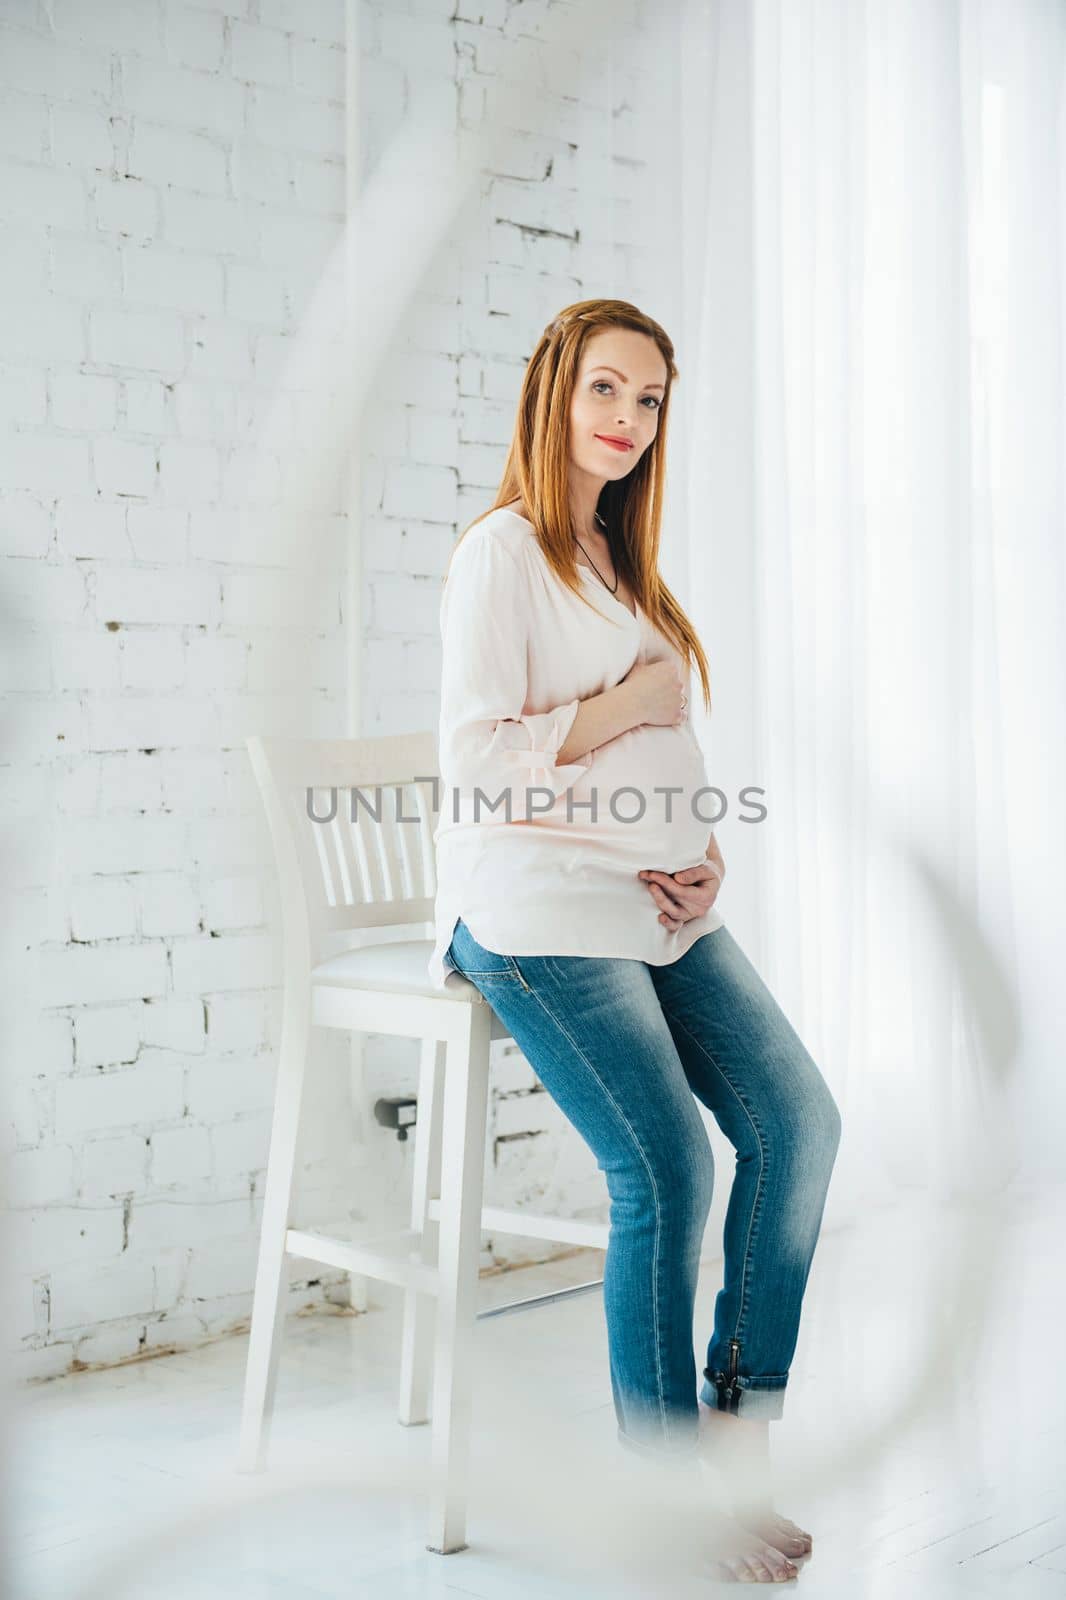 a red-haired pregnant girl in a light blouse and blue jeans sits on a high chair in a bright room